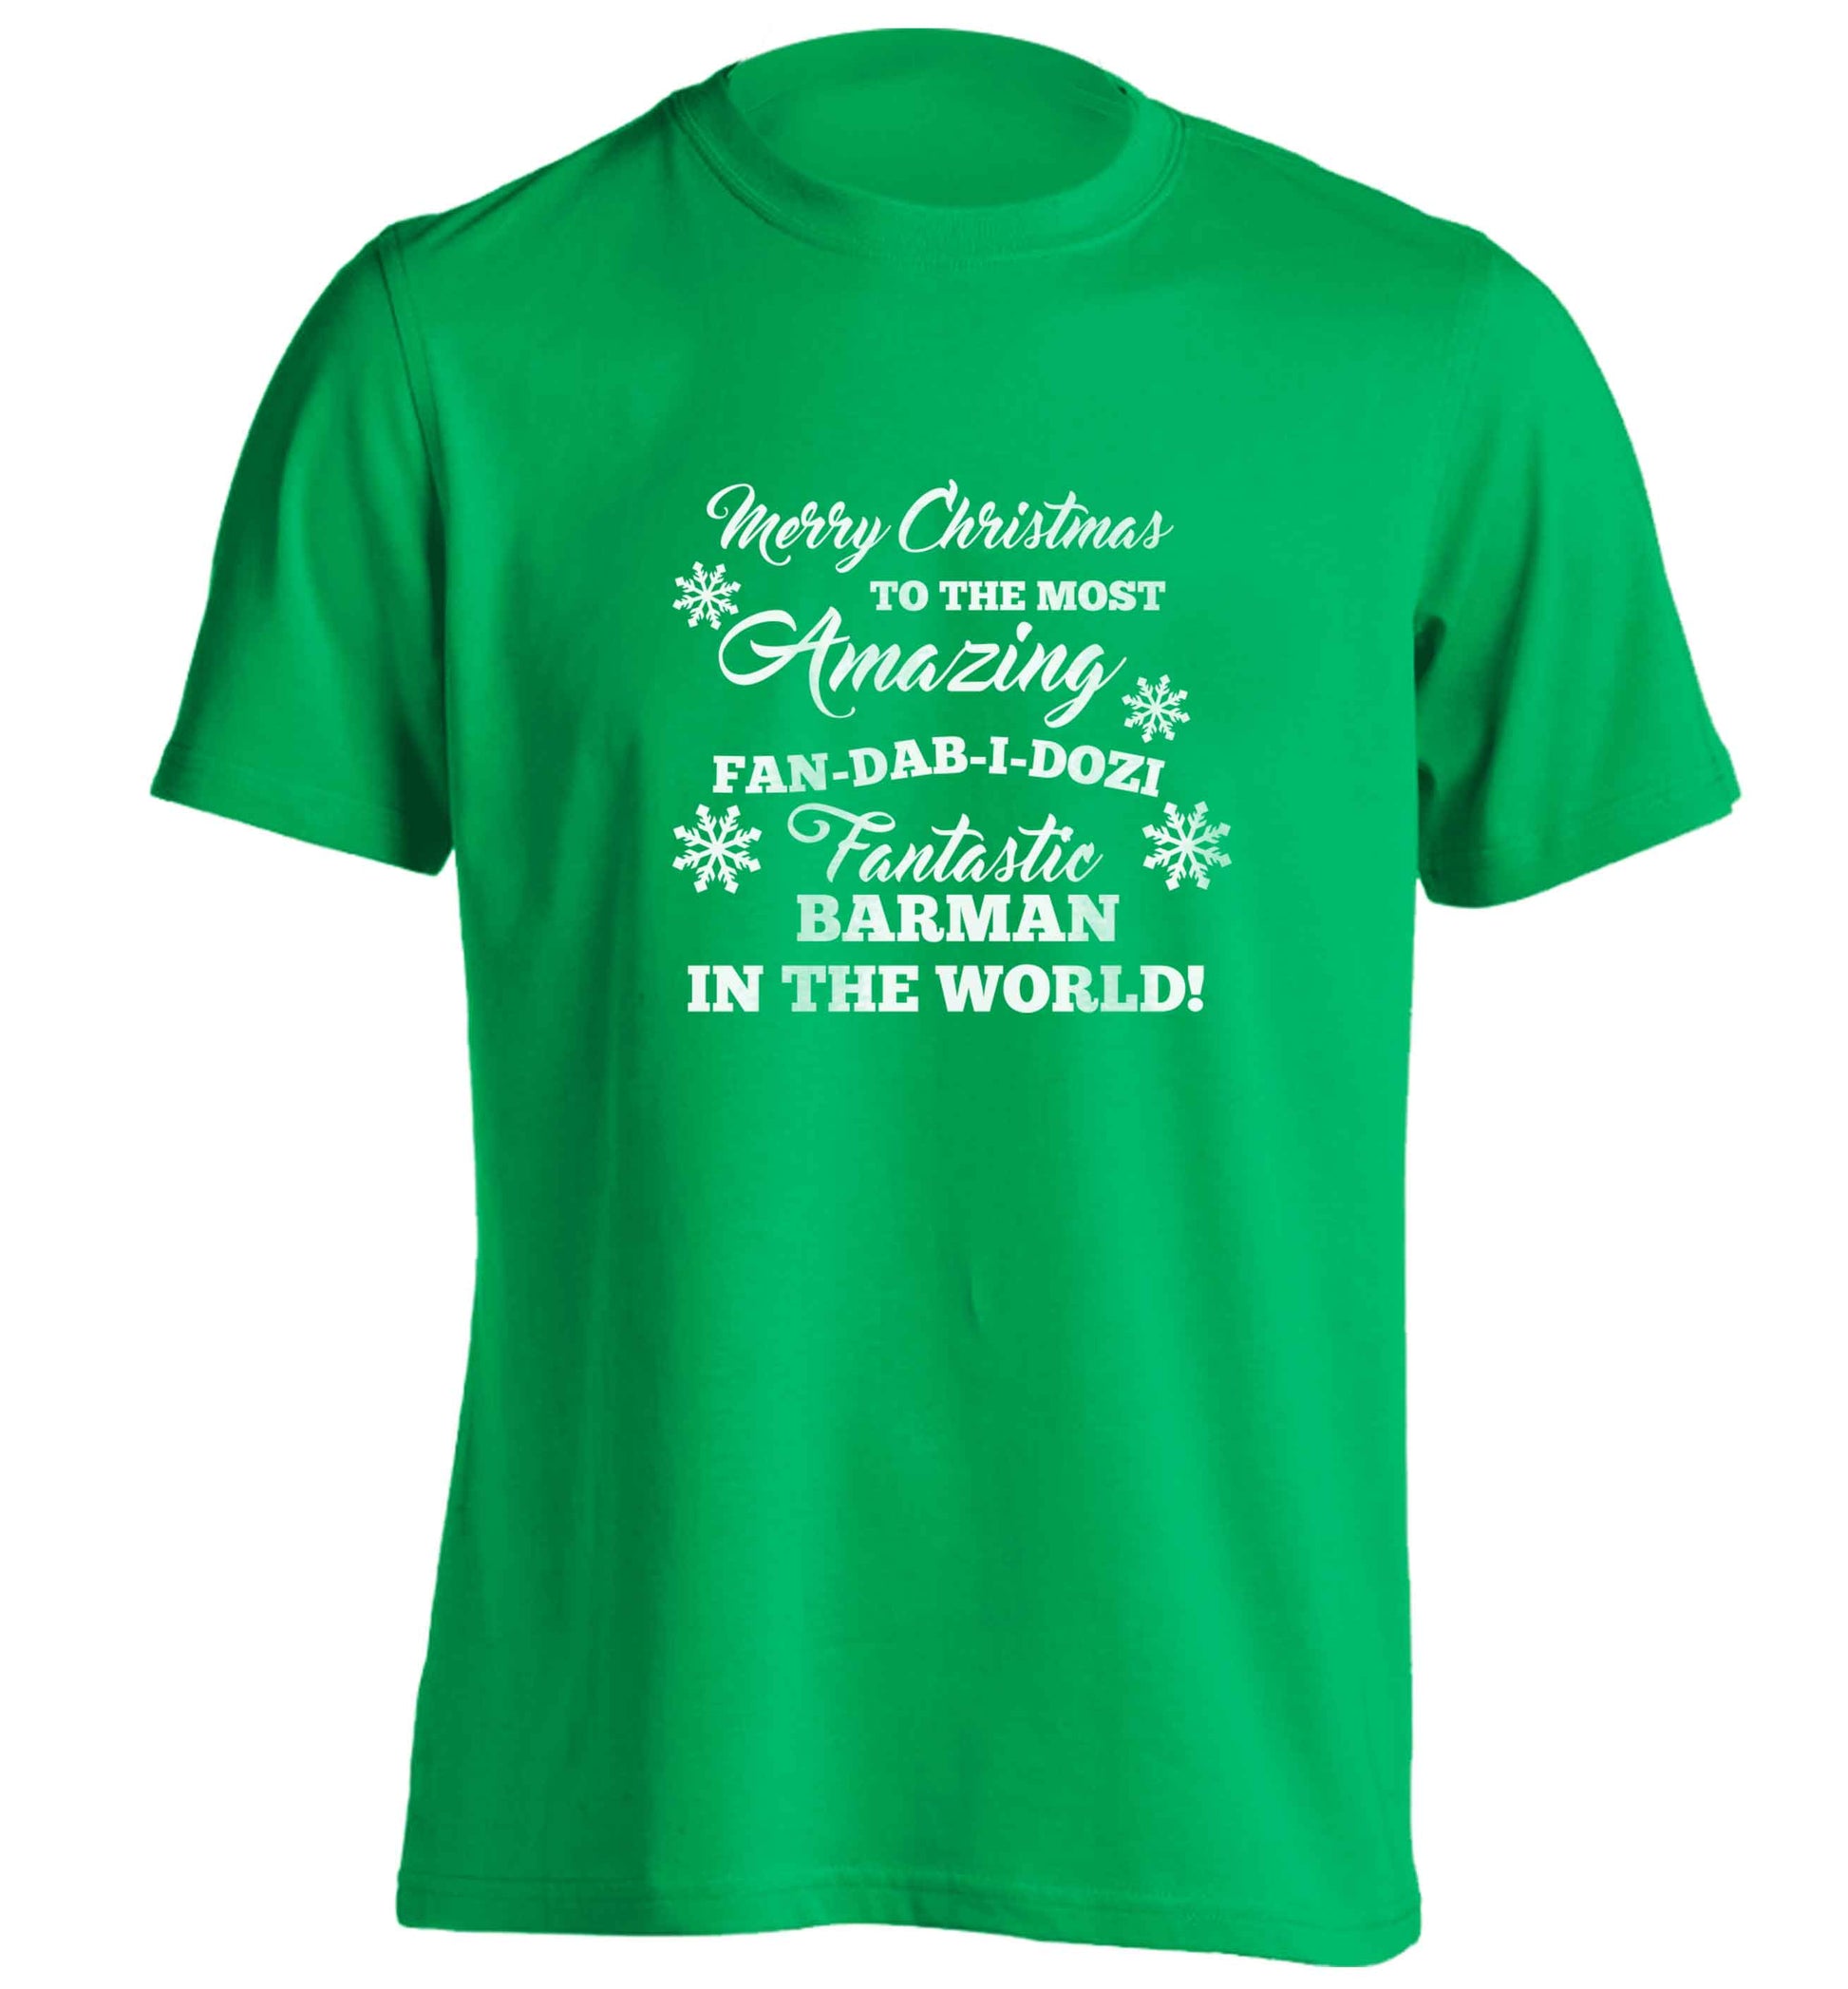 Merry Christmas to the most amazing barman in the world! adults unisex green Tshirt 2XL